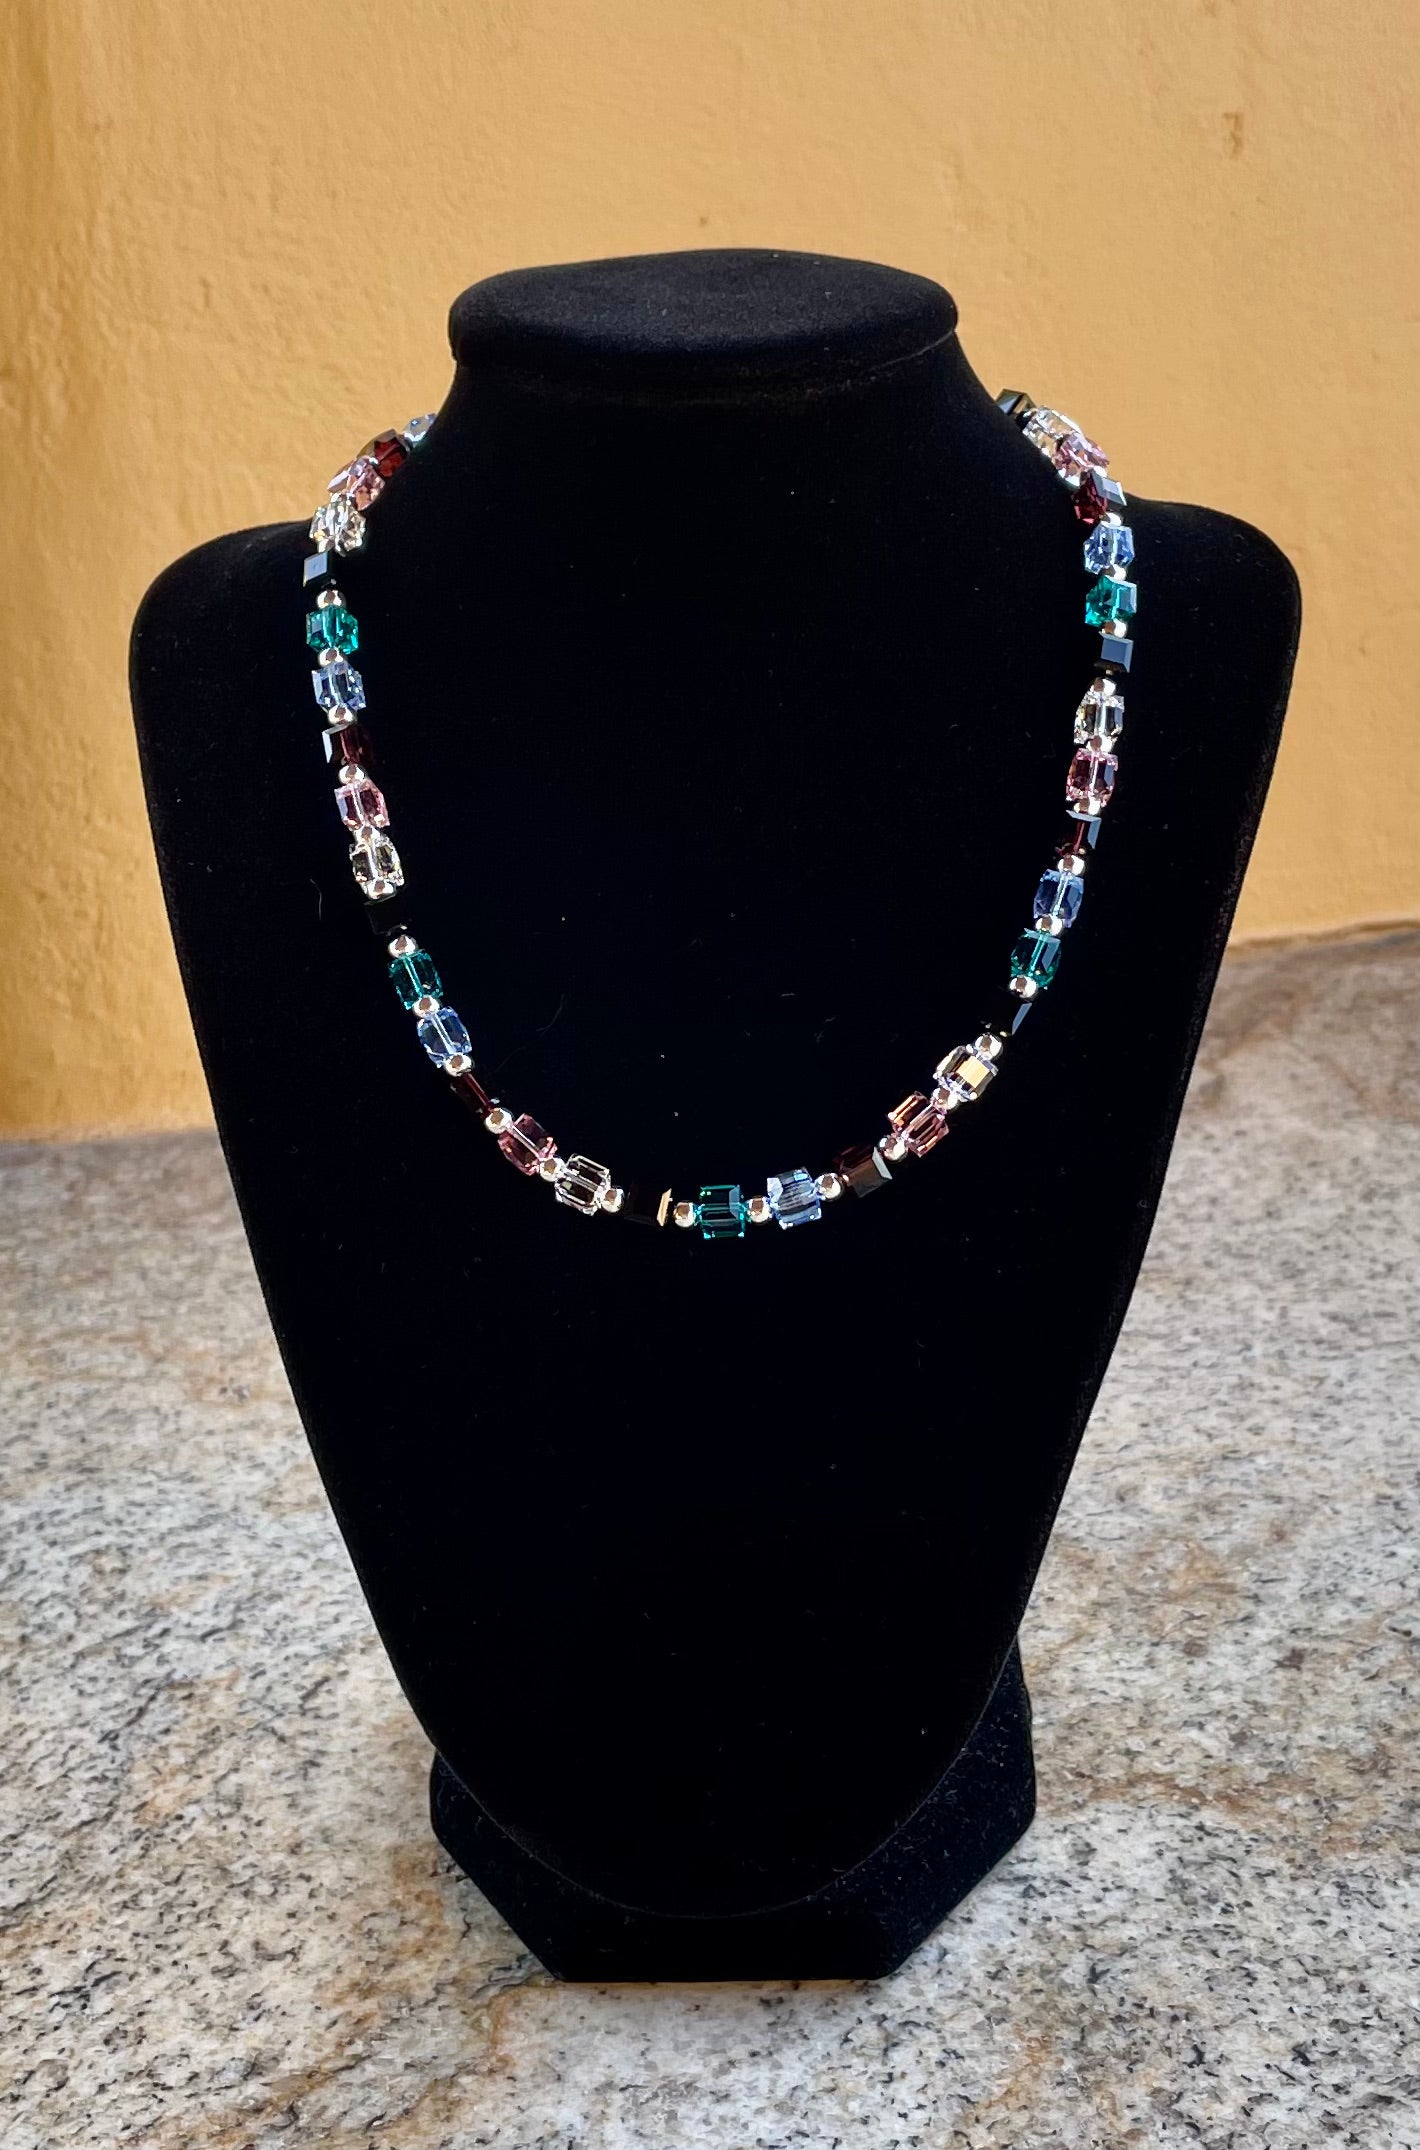 Necklace - Multi-color Swarovski crystal necklace with sterling silver